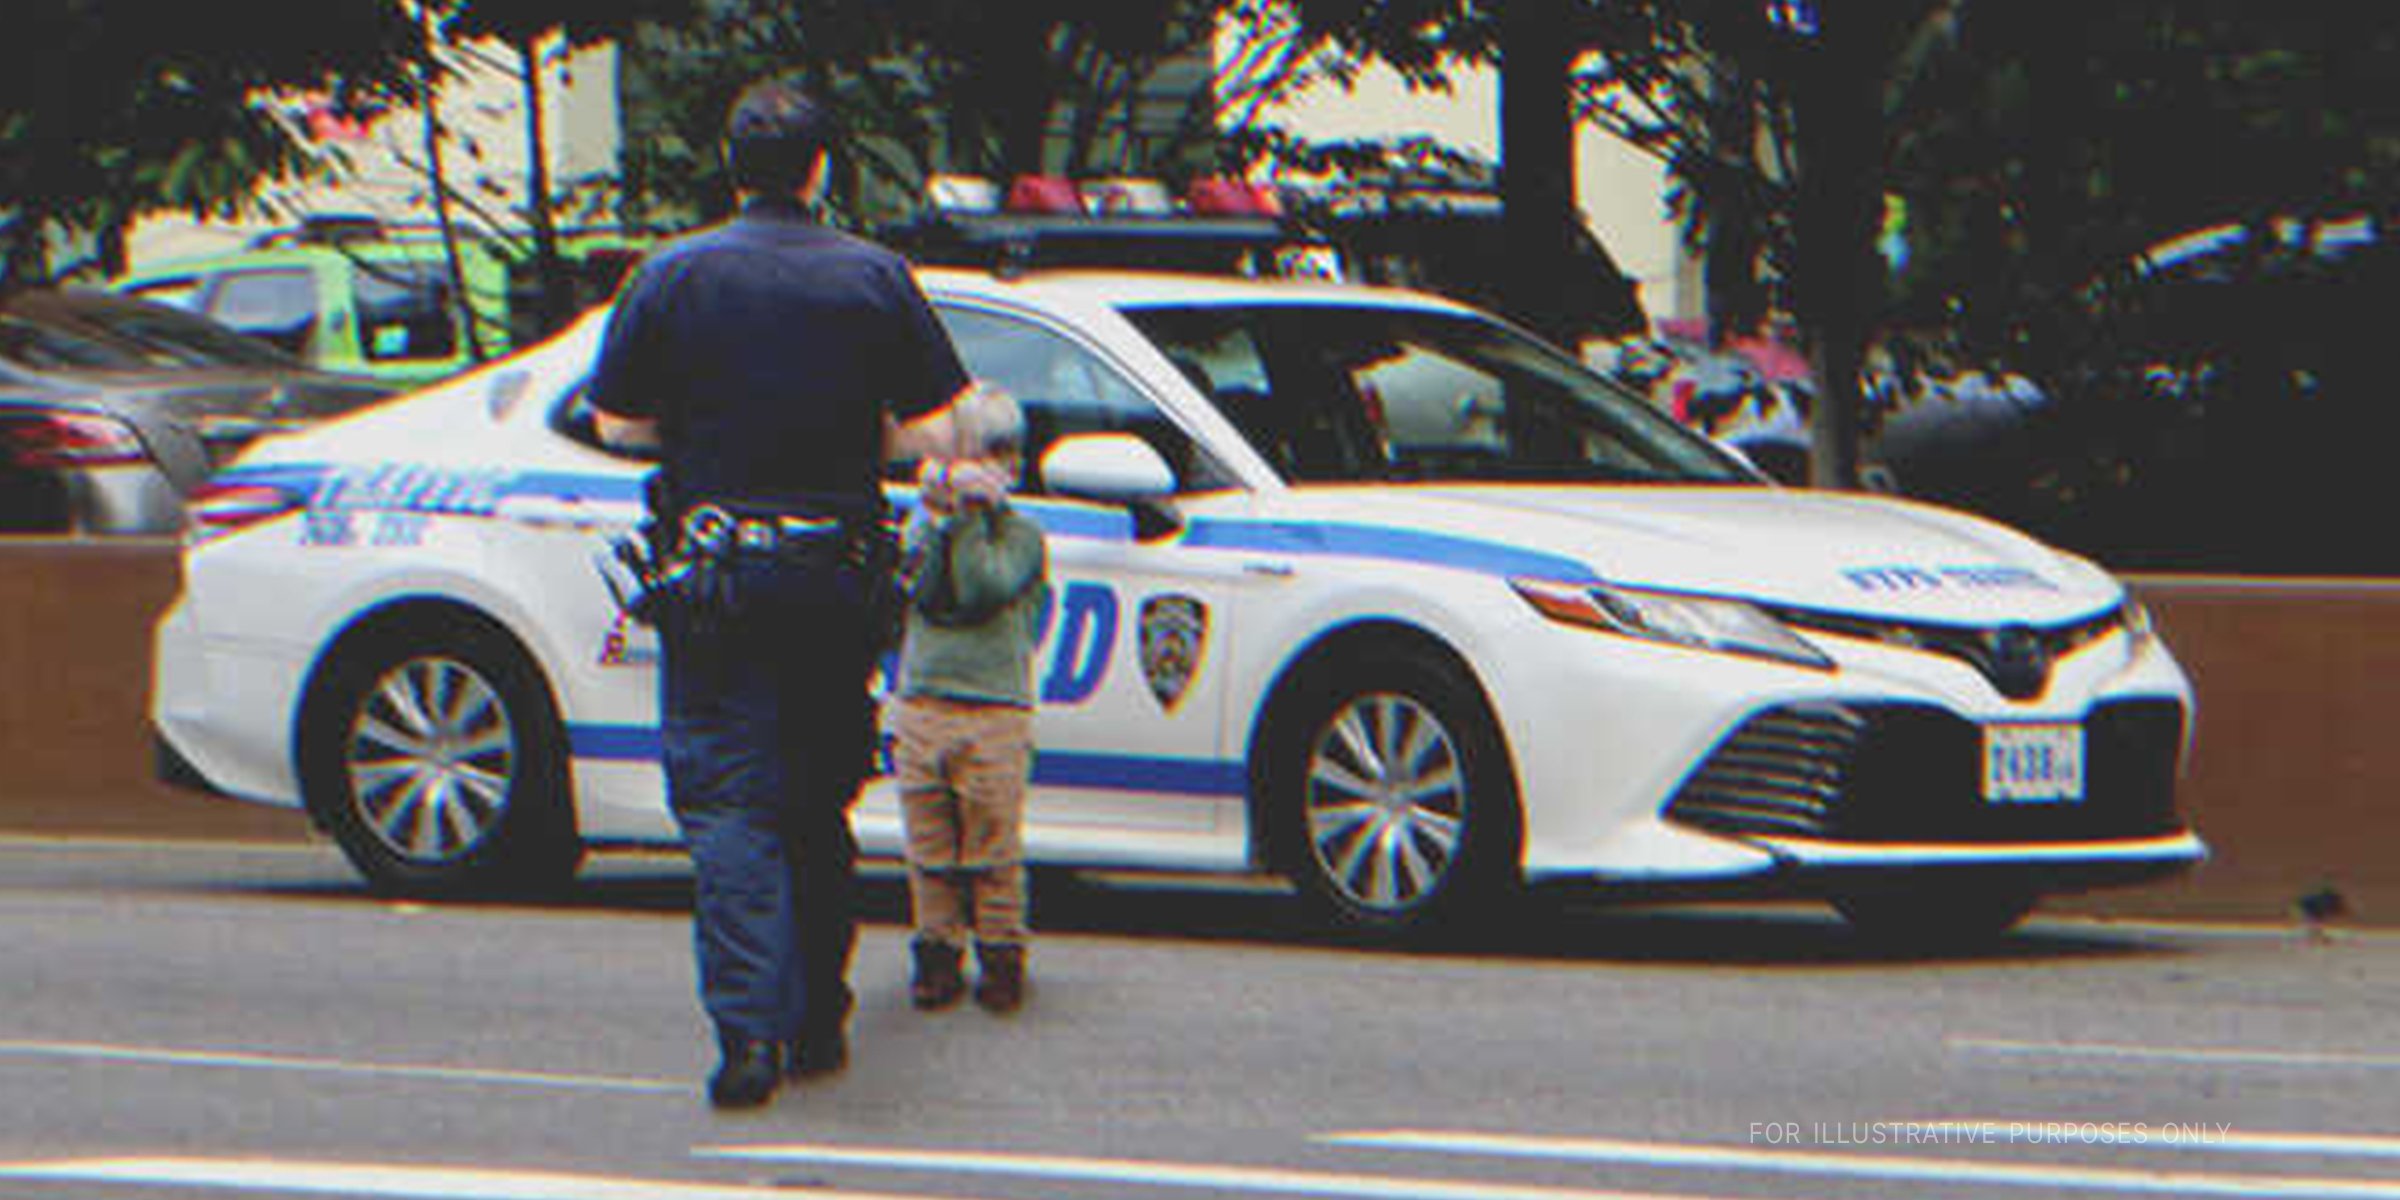 Cop following boy to police car. | Flickr / JLaw45 (CC BY 2.0)